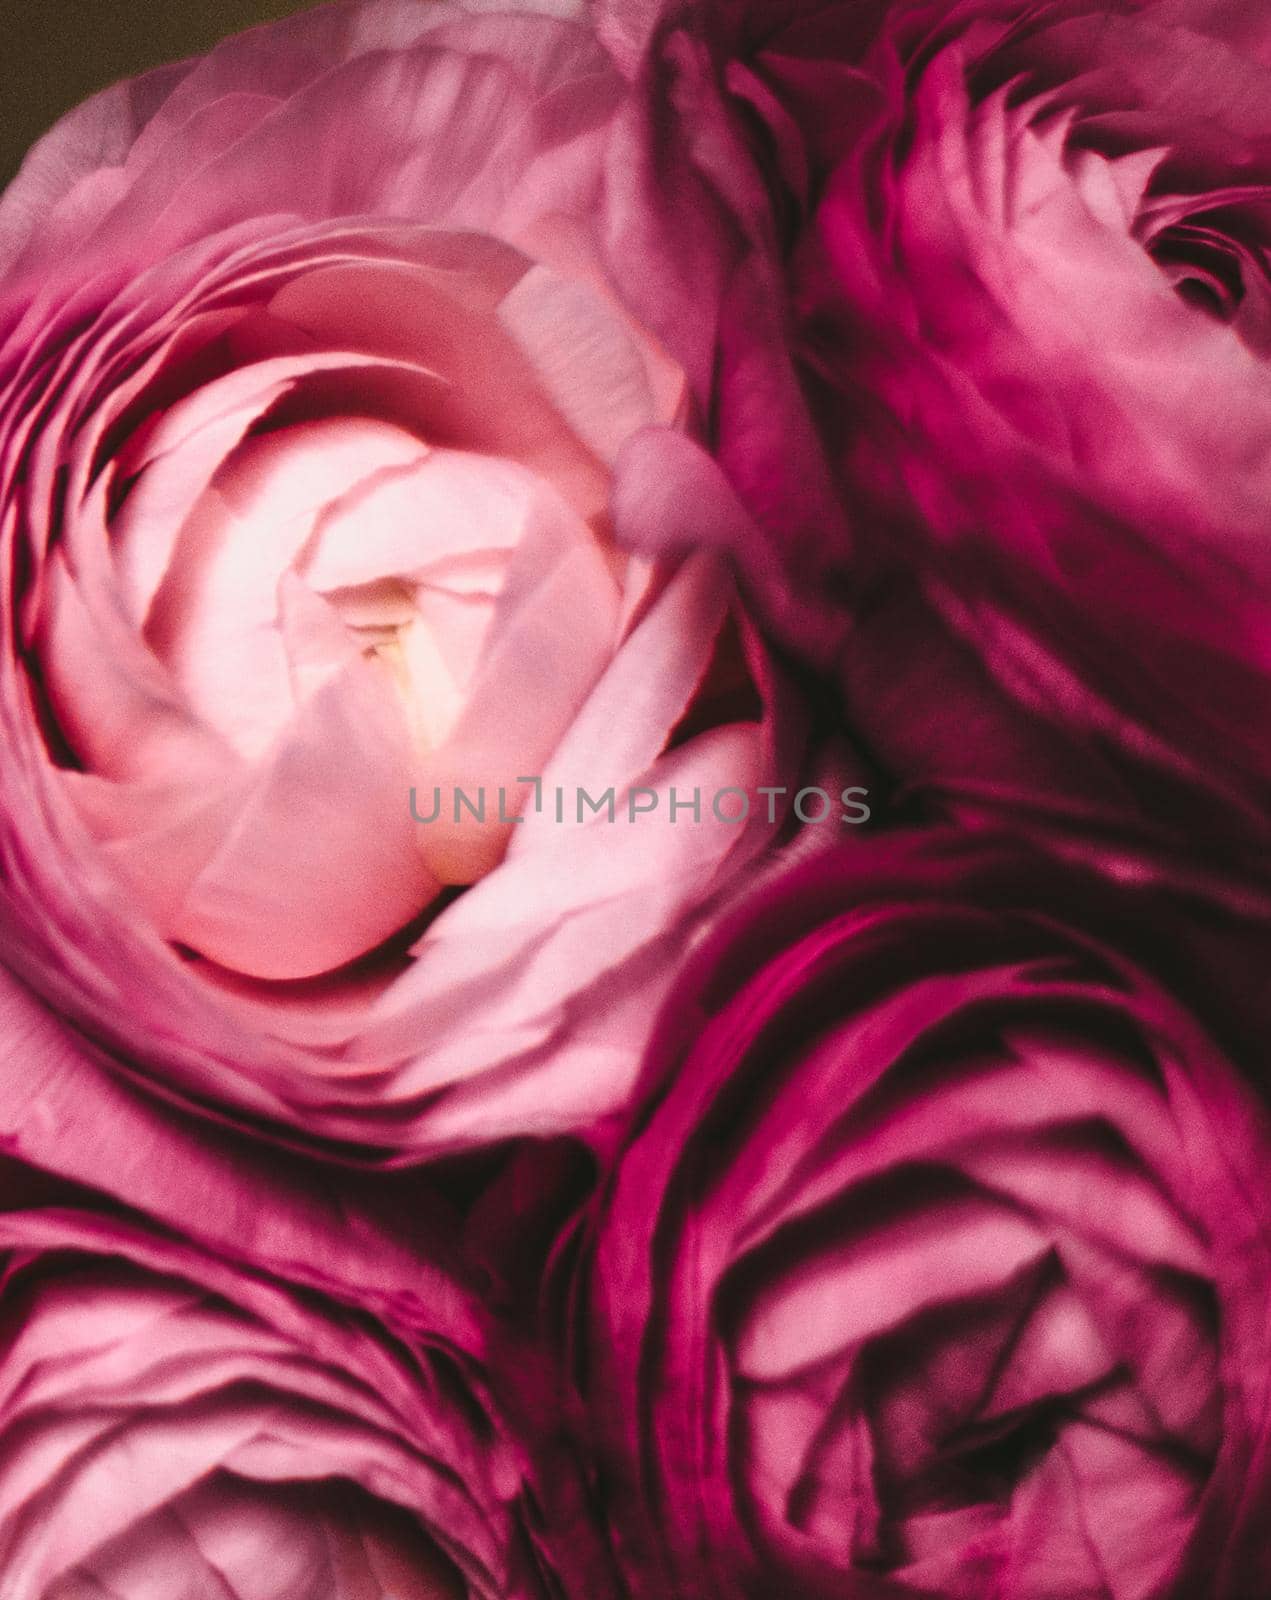 rose flowers close-up - wedding, holiday and floral background styled concept, elegant visuals